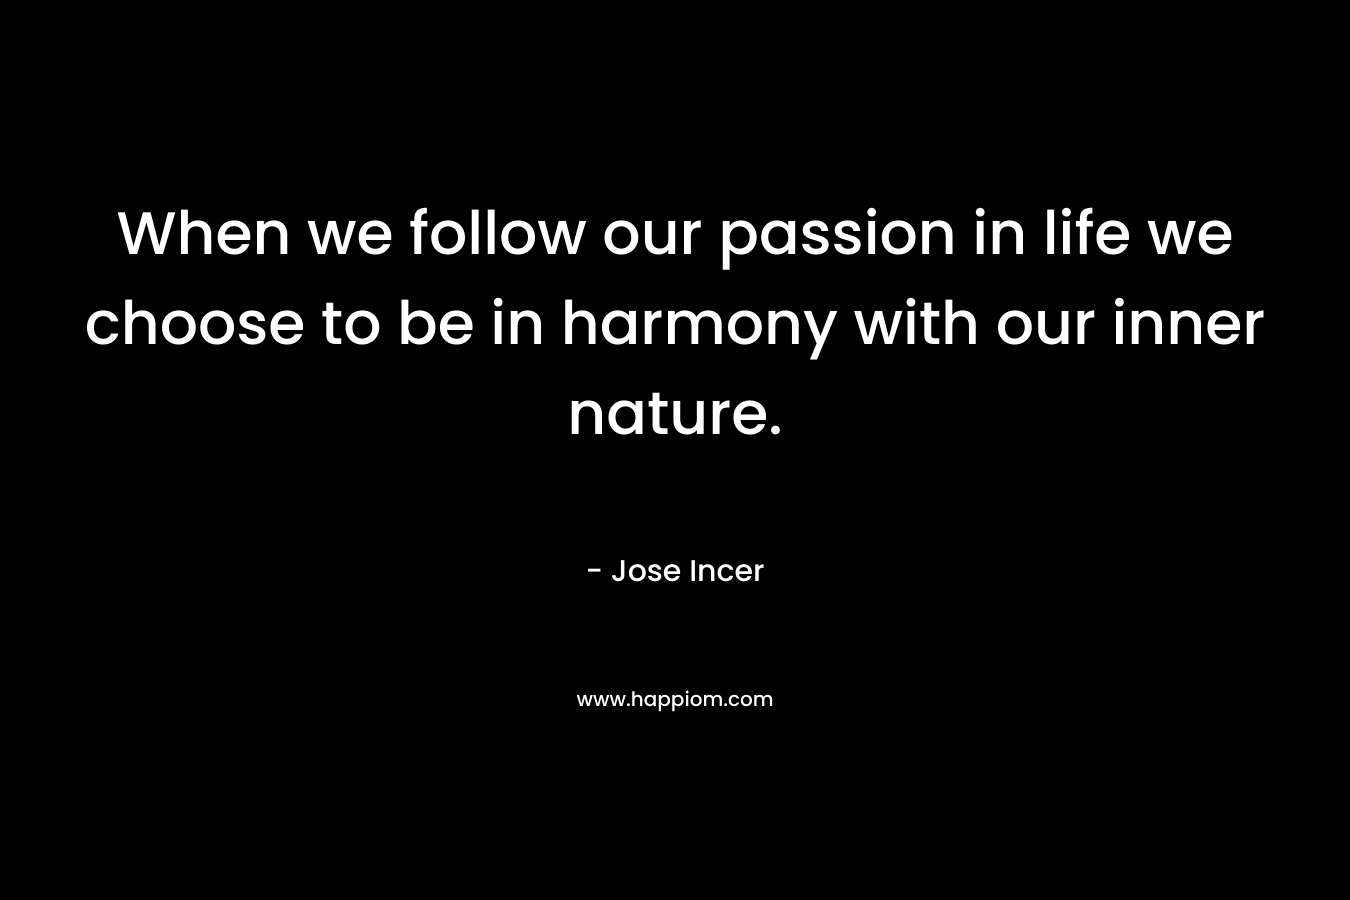 When we follow our passion in life we choose to be in harmony with our inner nature. – Jose Incer